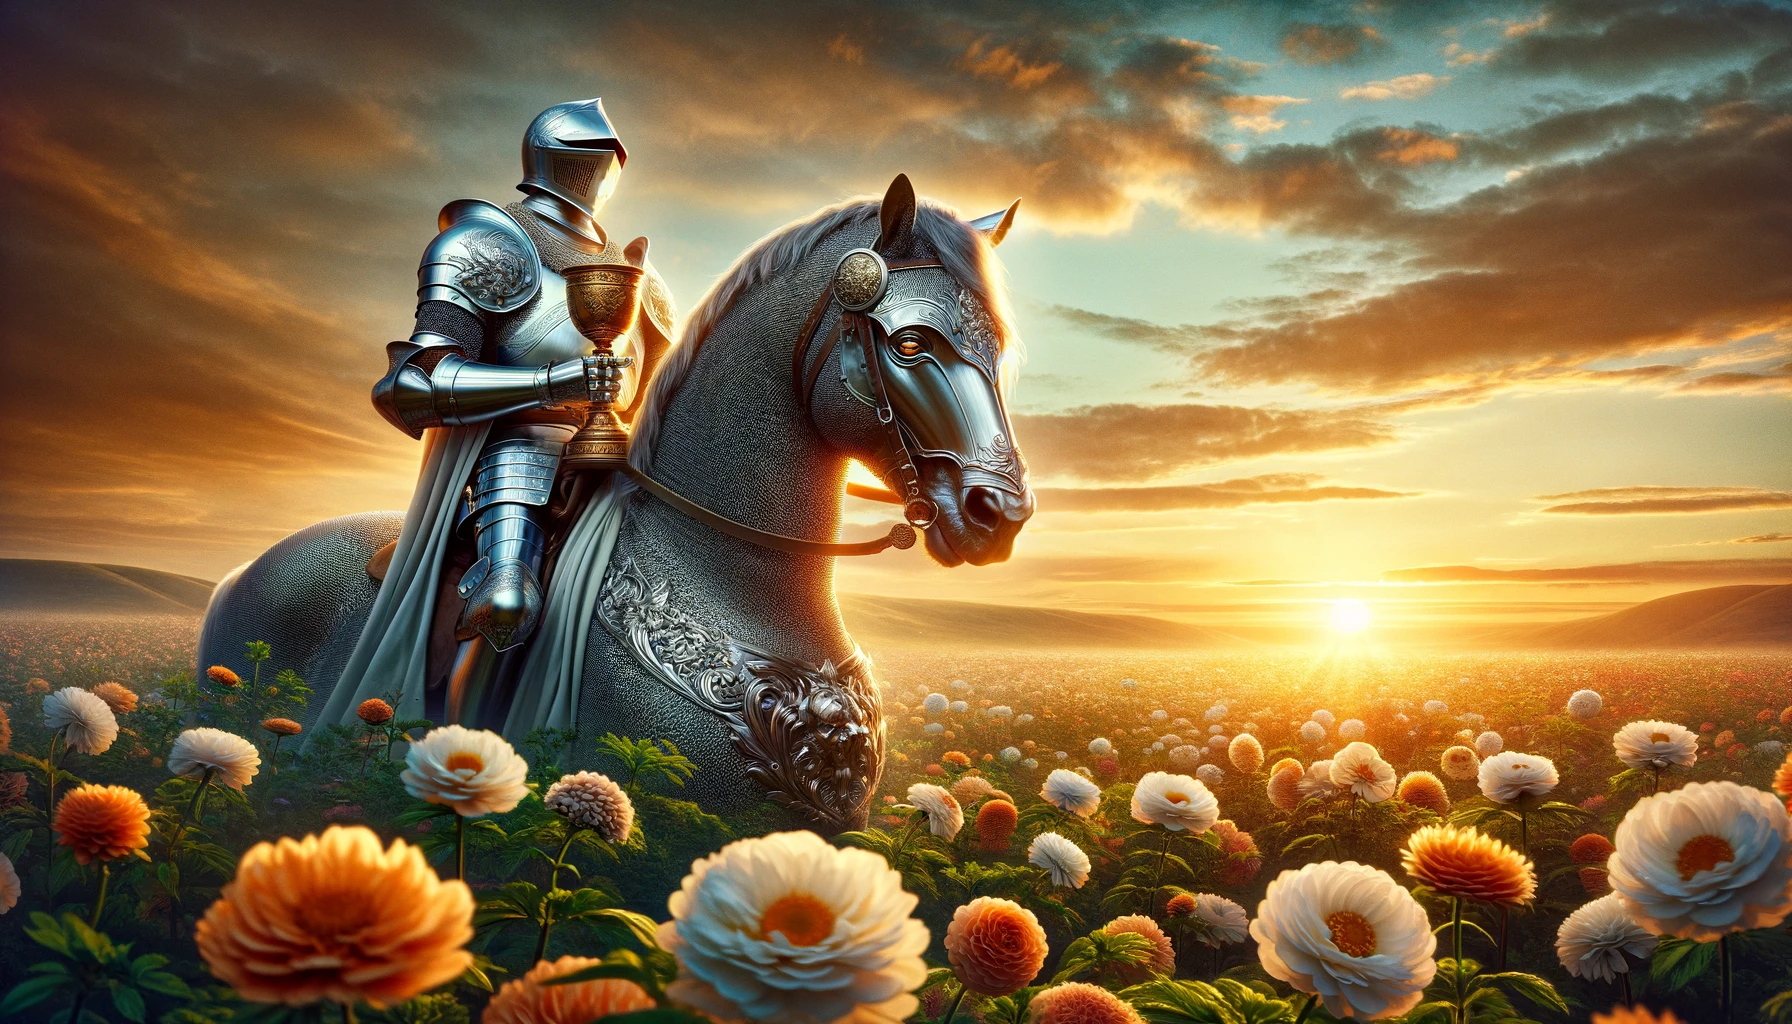 An image of a lone knight on horseback adorned in shimmering silver armor holding a golden cup. The knight is surrounded by a field of lush bloomin